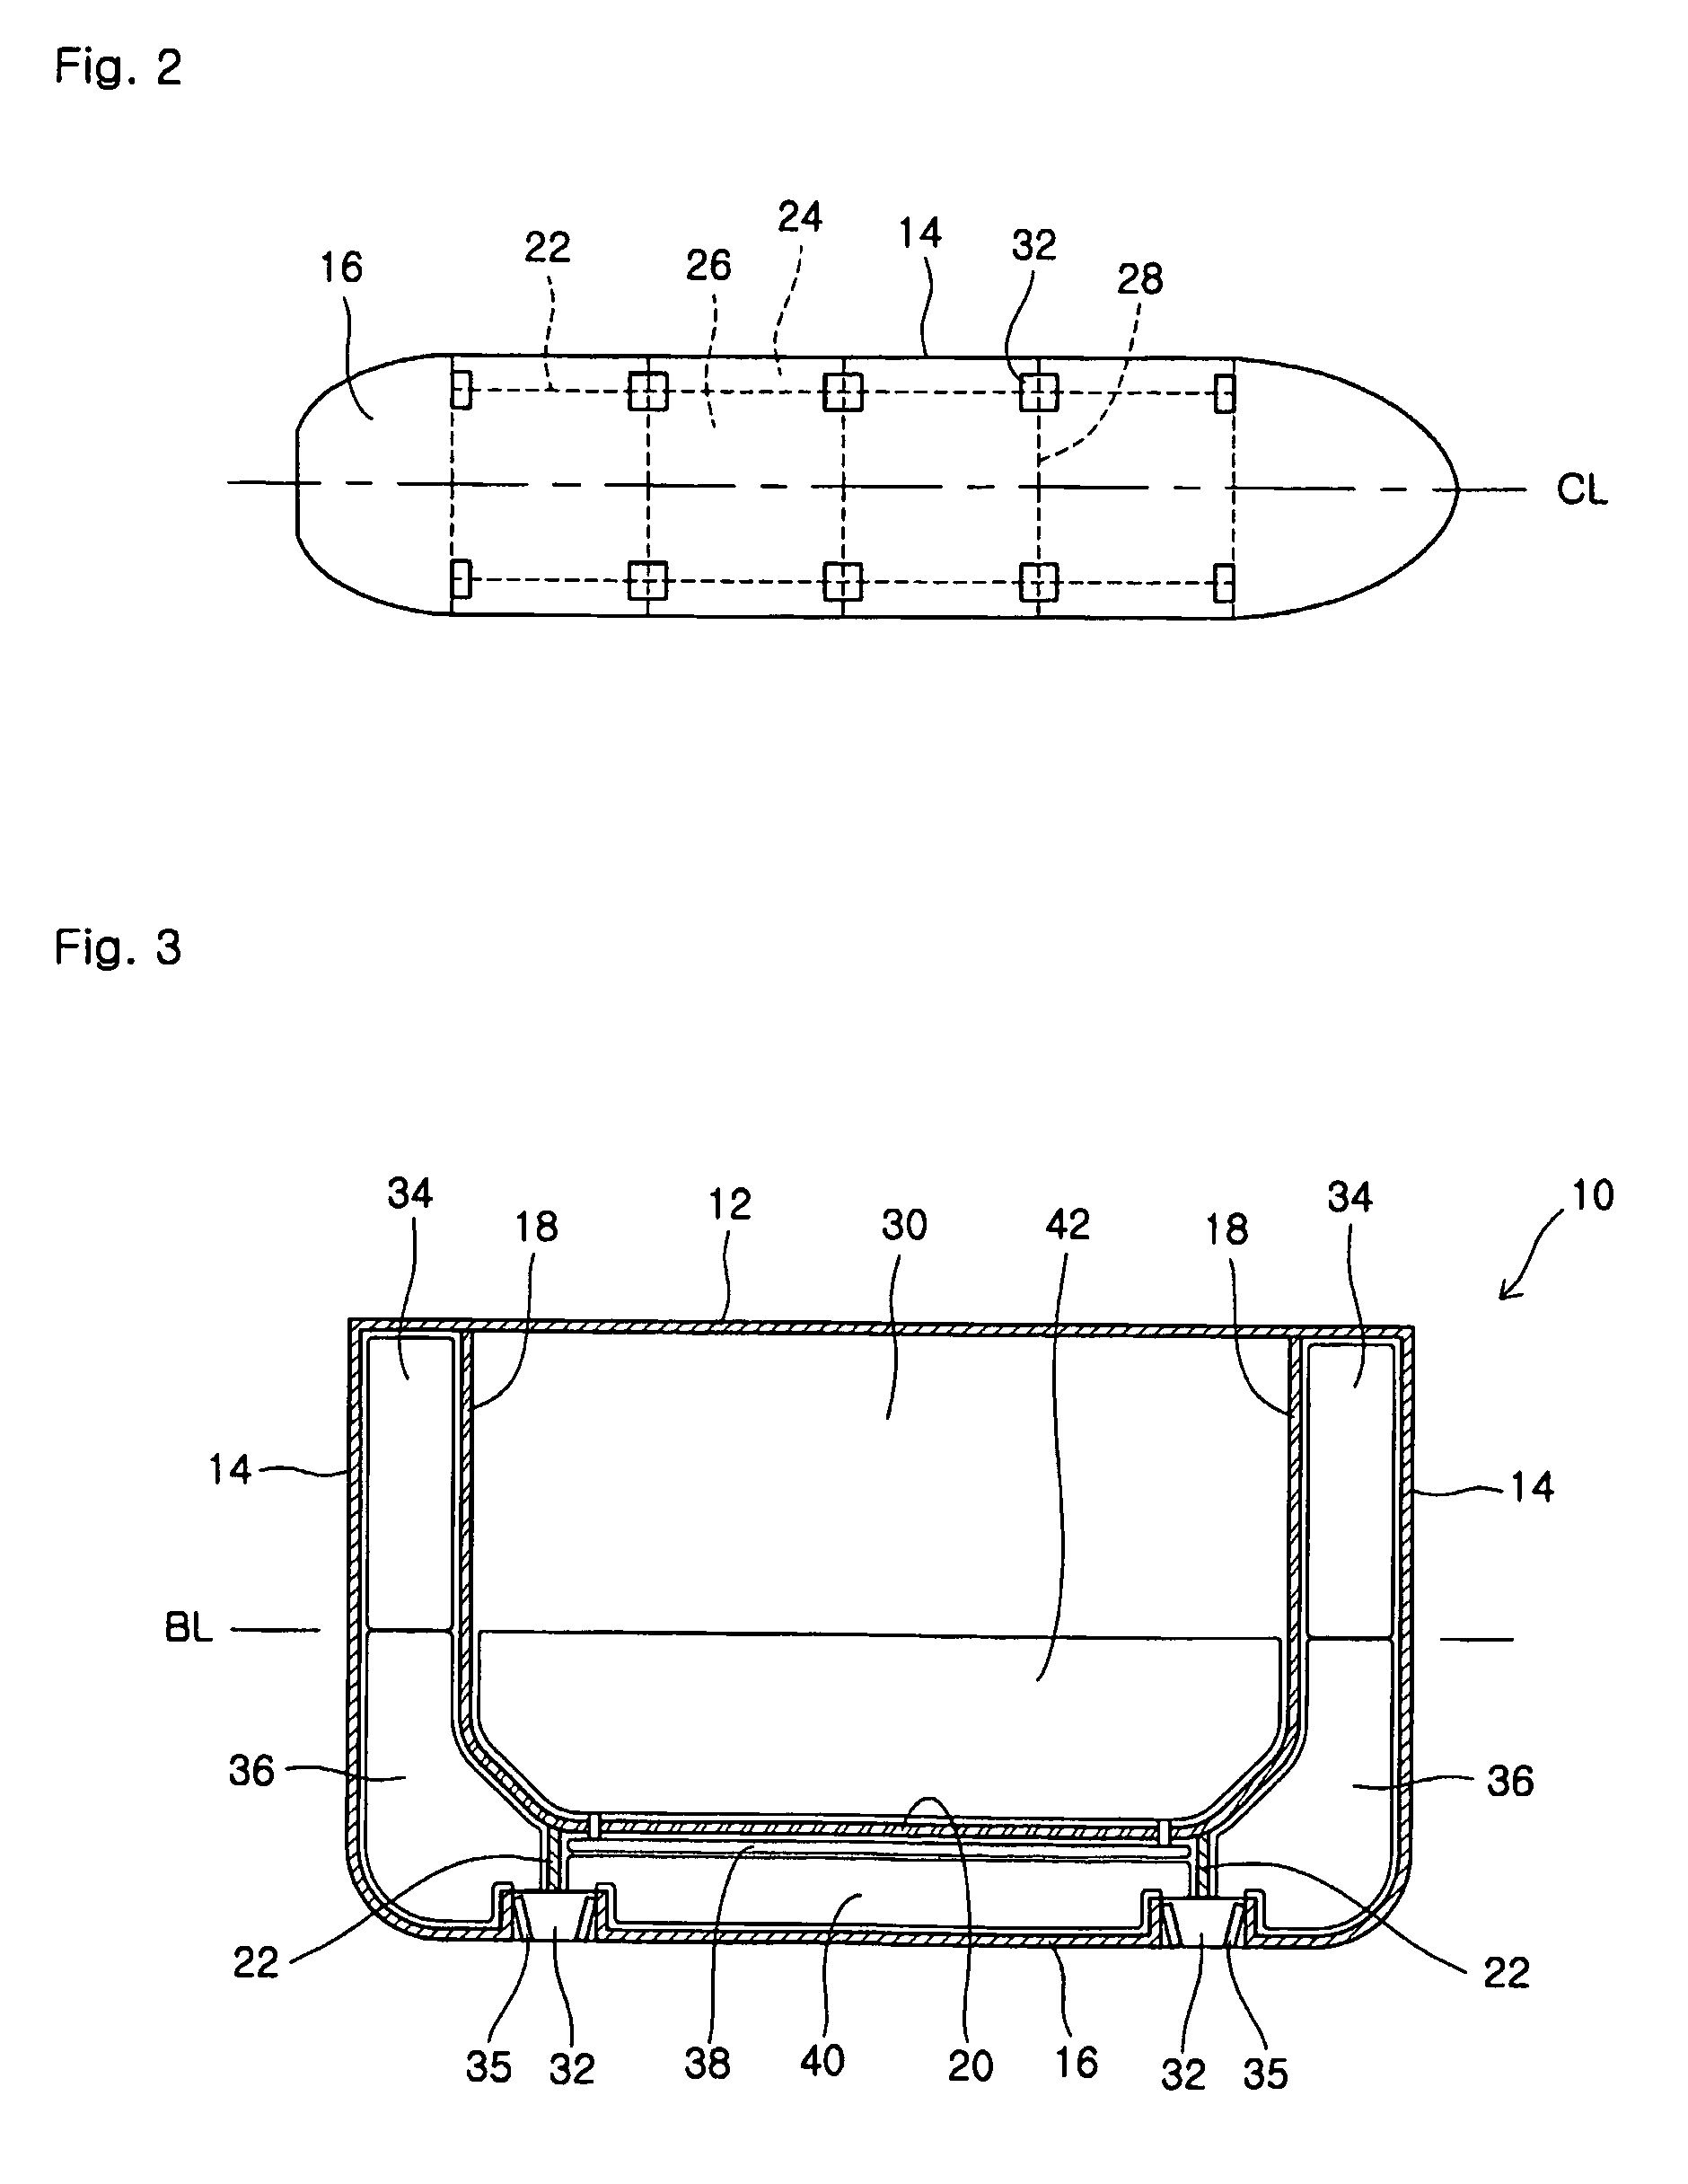 Vessel including automatic ballast system using tubes